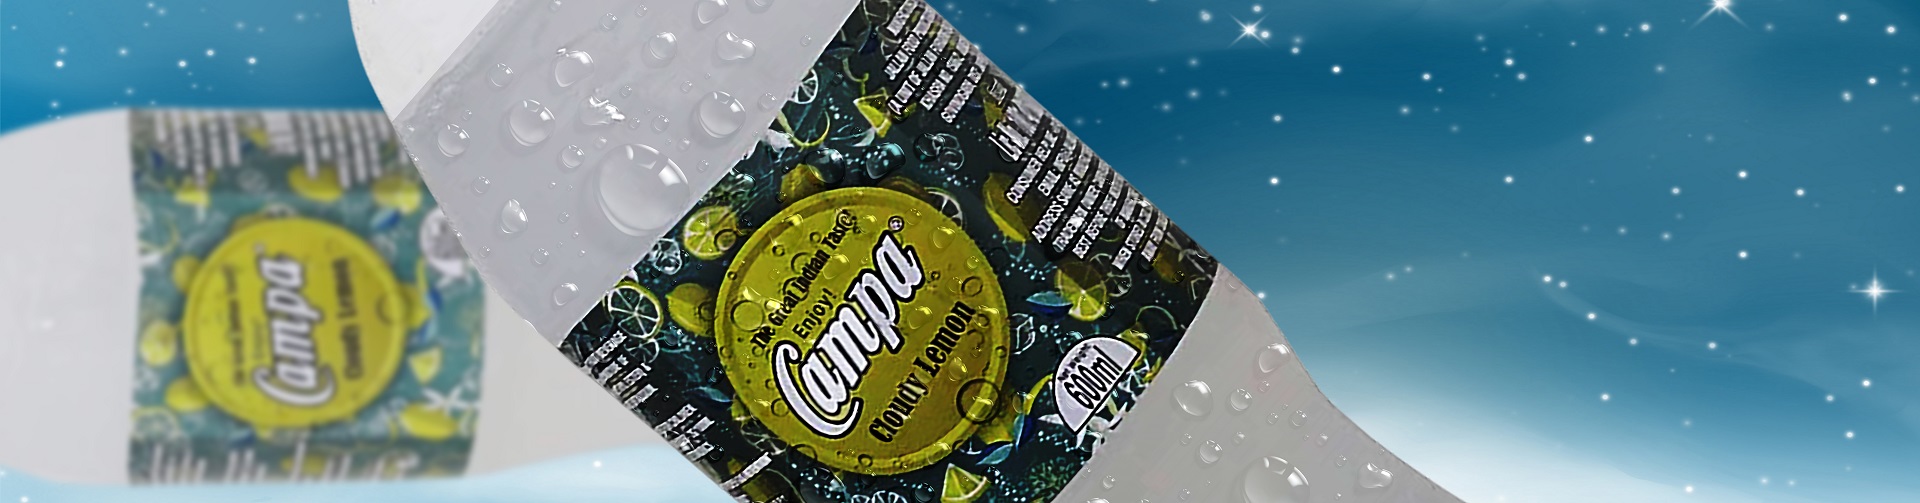 Picture of Campa Cloudy Lemon banner